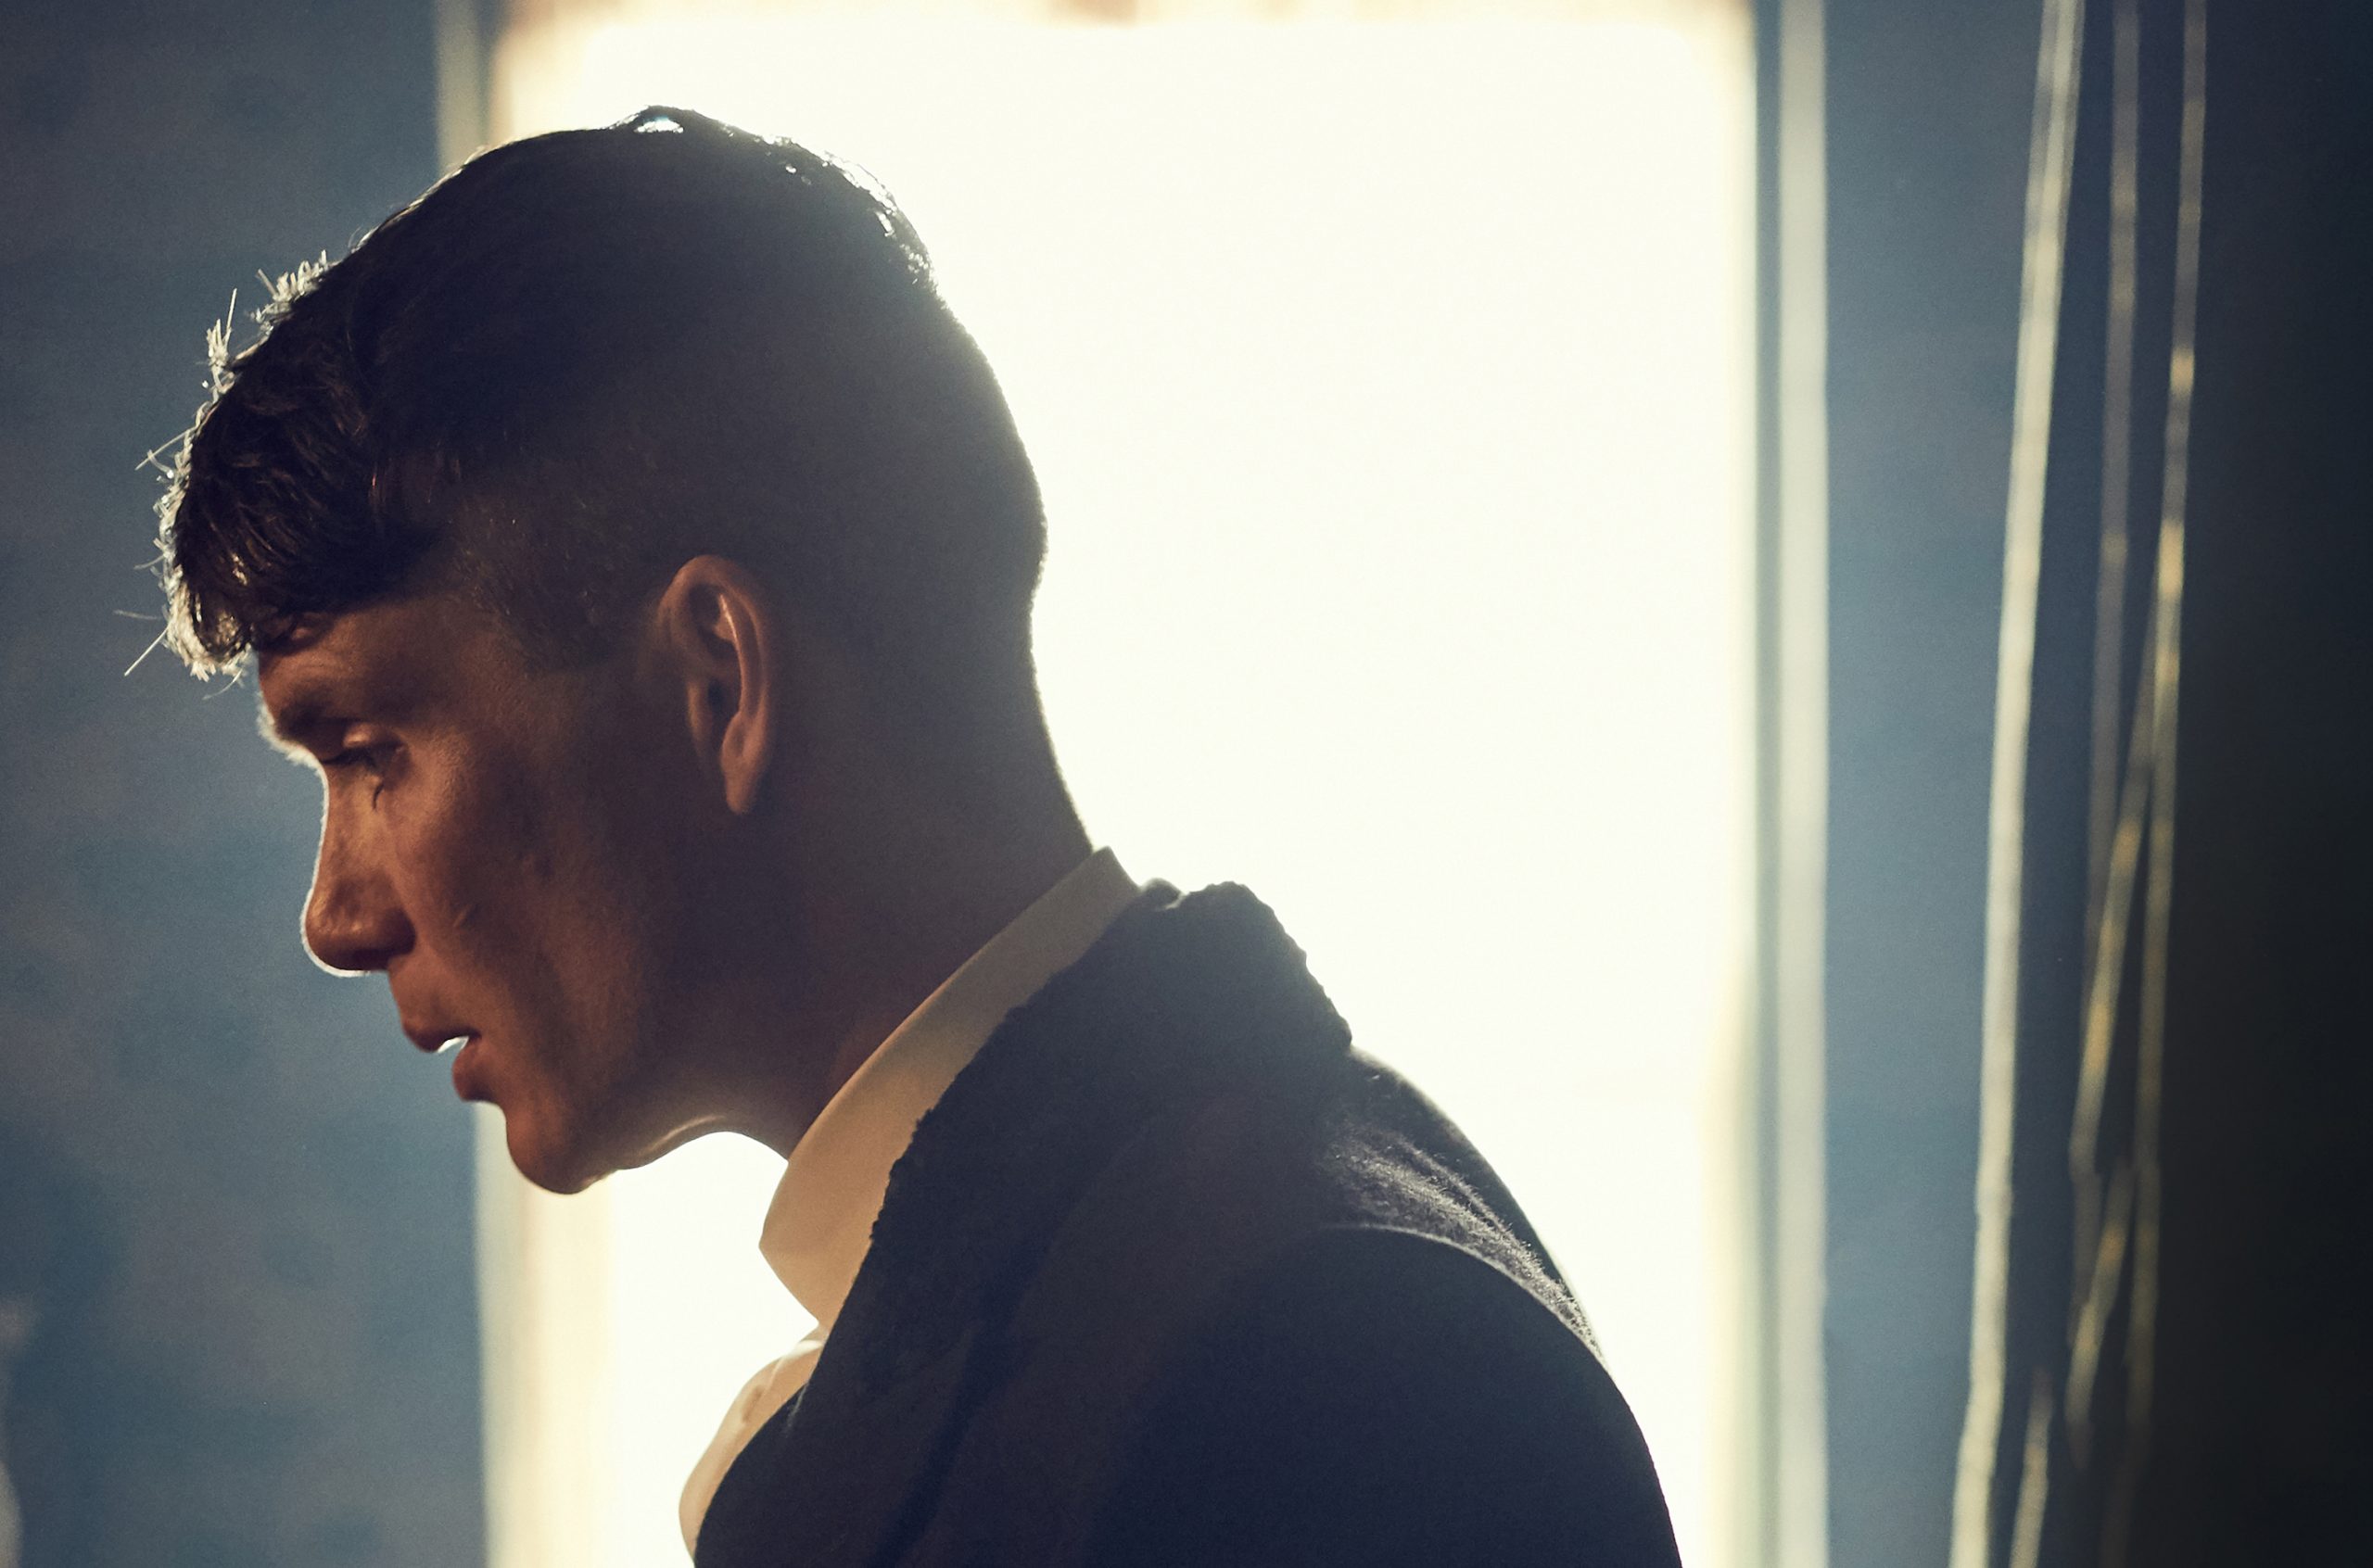 Cillian Murphy stars in Netflix's Peaky Blinders, which was voted the hardest TV show to understand in a subtitle survey